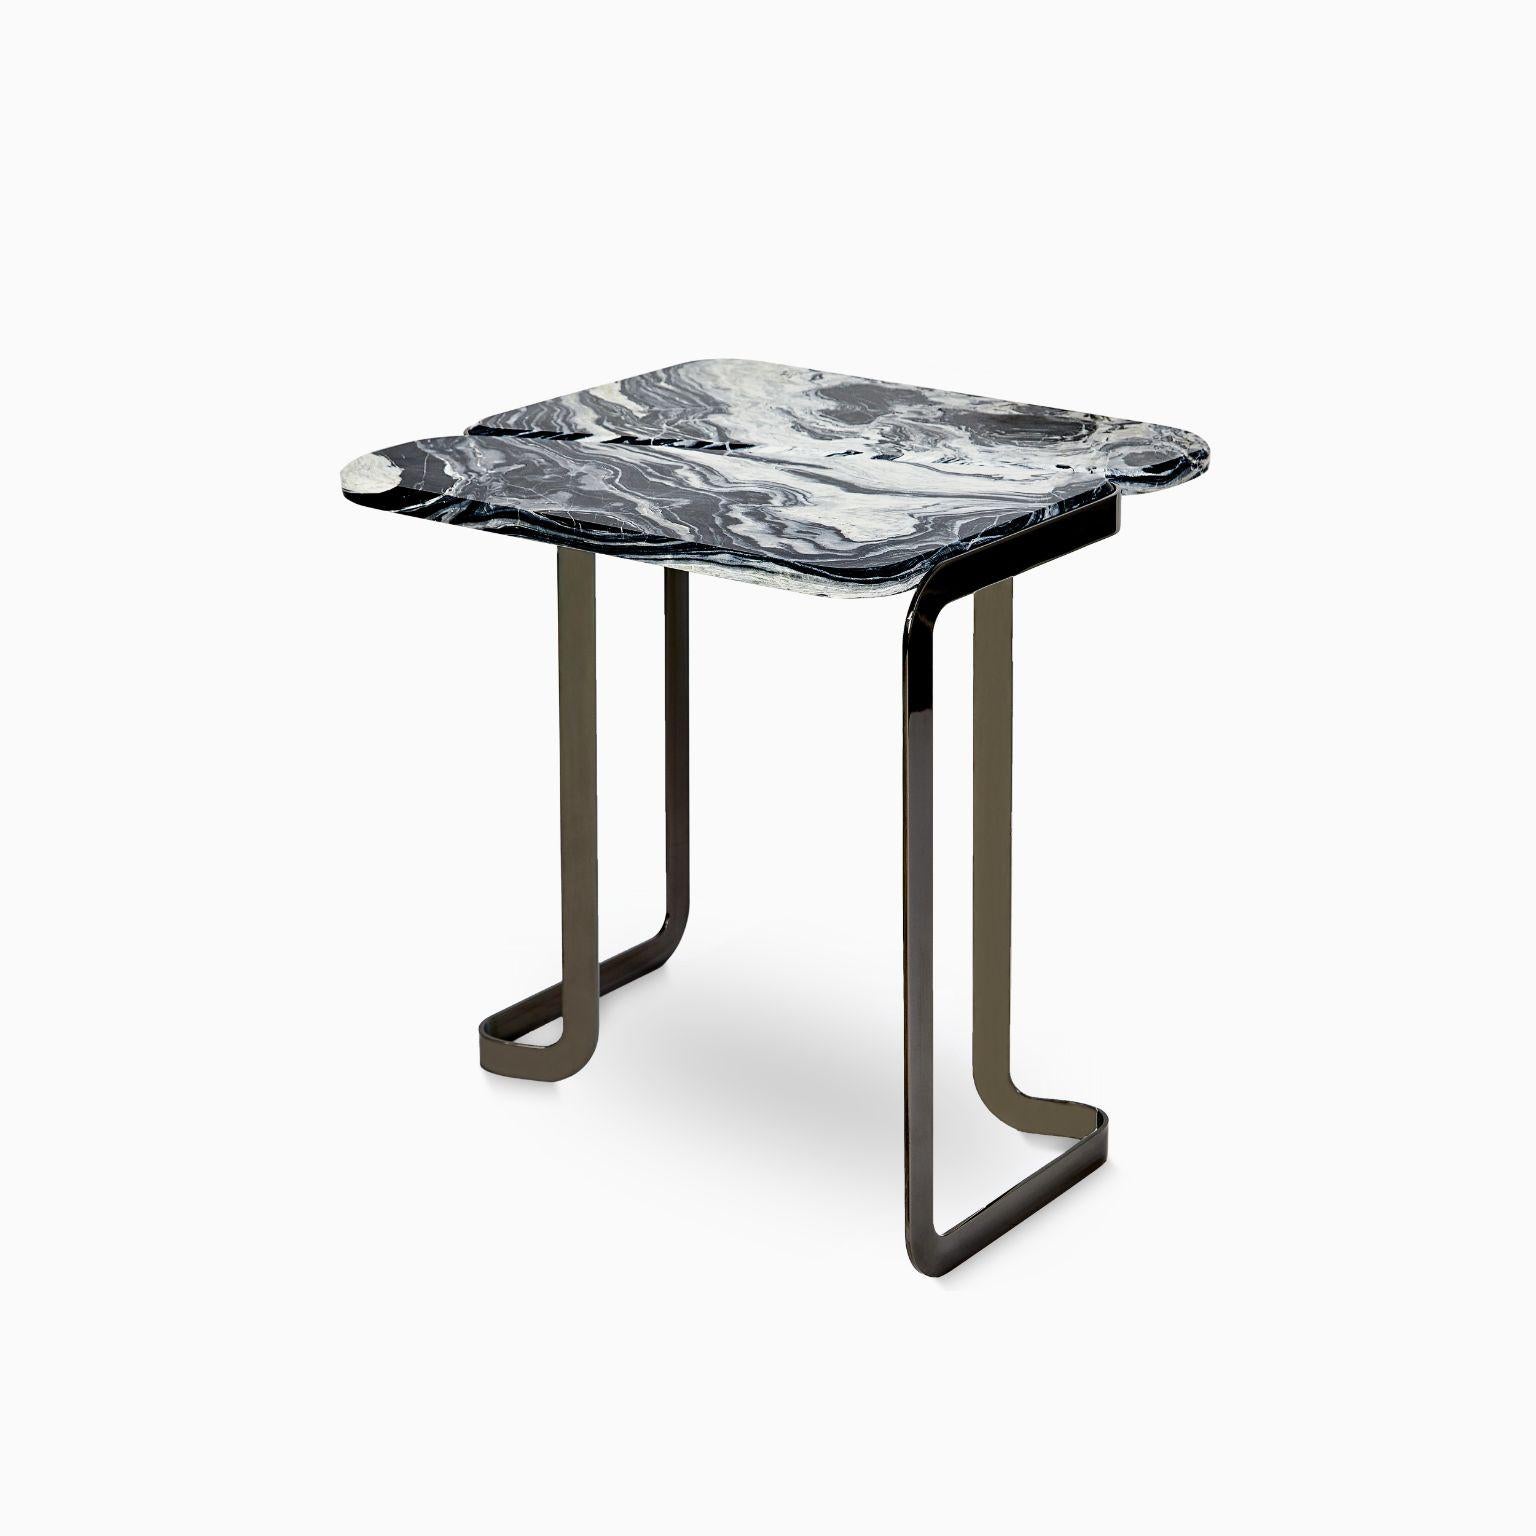 Black Tigris side table black by Marble Balloon.
Dimensions: 49.5 x 50 x H 52.5 cm. 
Materials: Stainless metal, marble.

It consists of carrier legs made of titanium coating on stainless metal and a marble top.

Marble Balloon is an interior